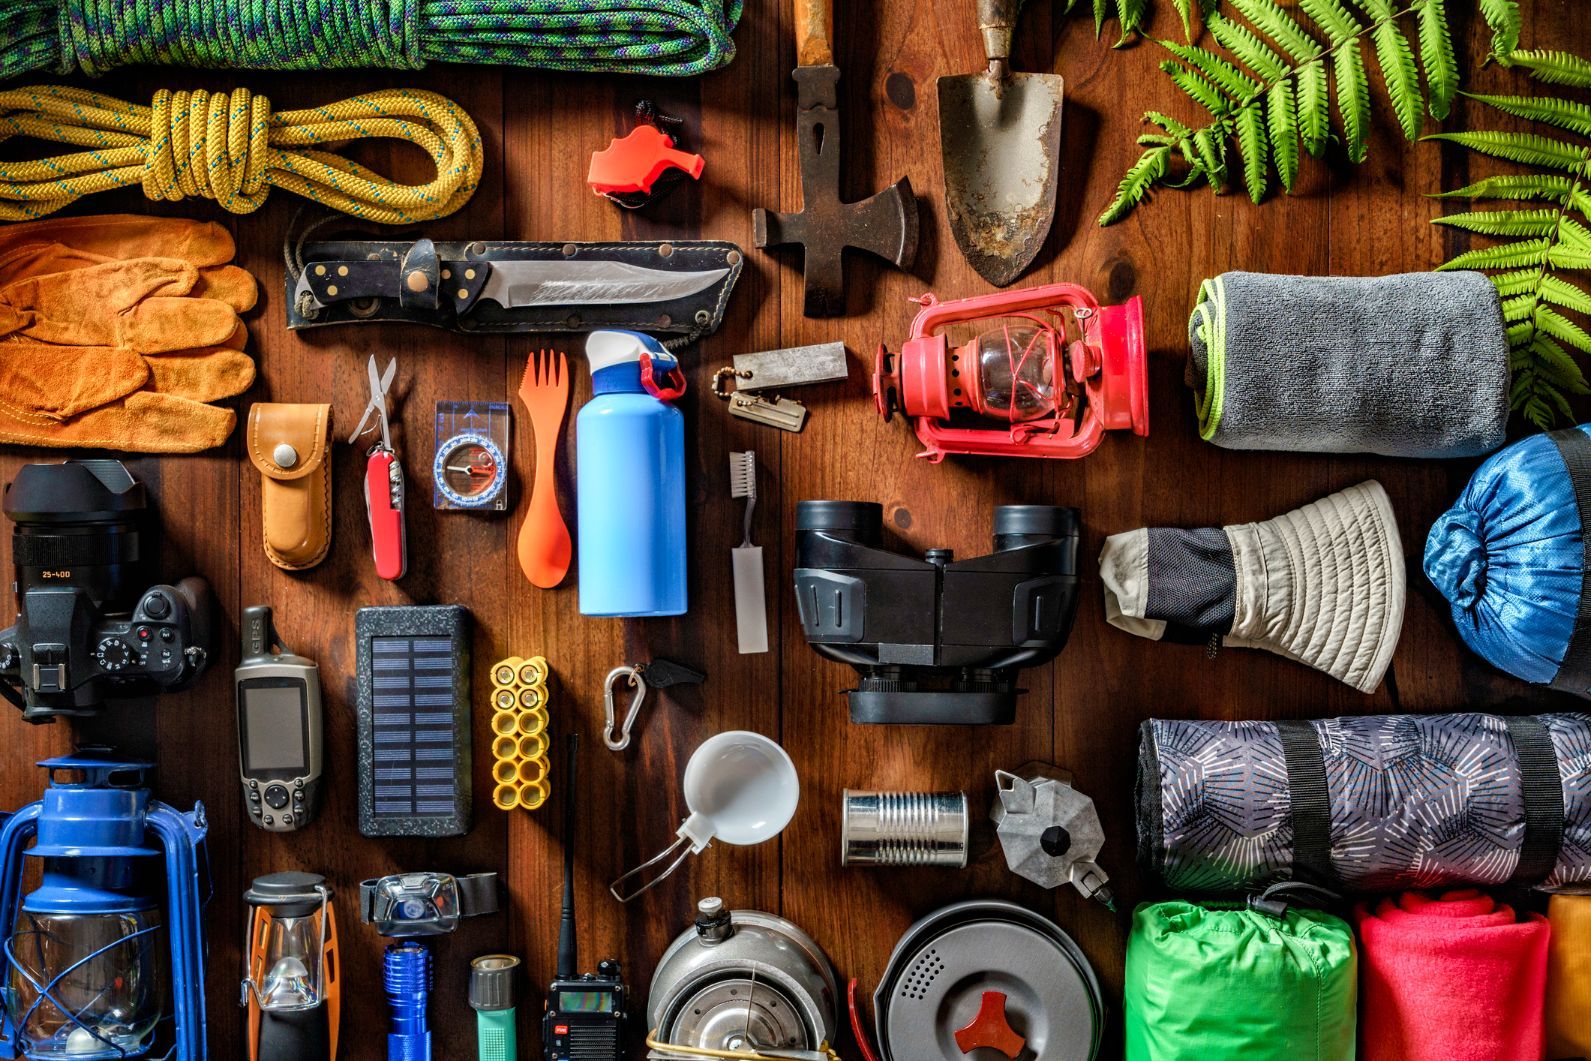 Everything you need to go camping - all the camping kit you could dream of.